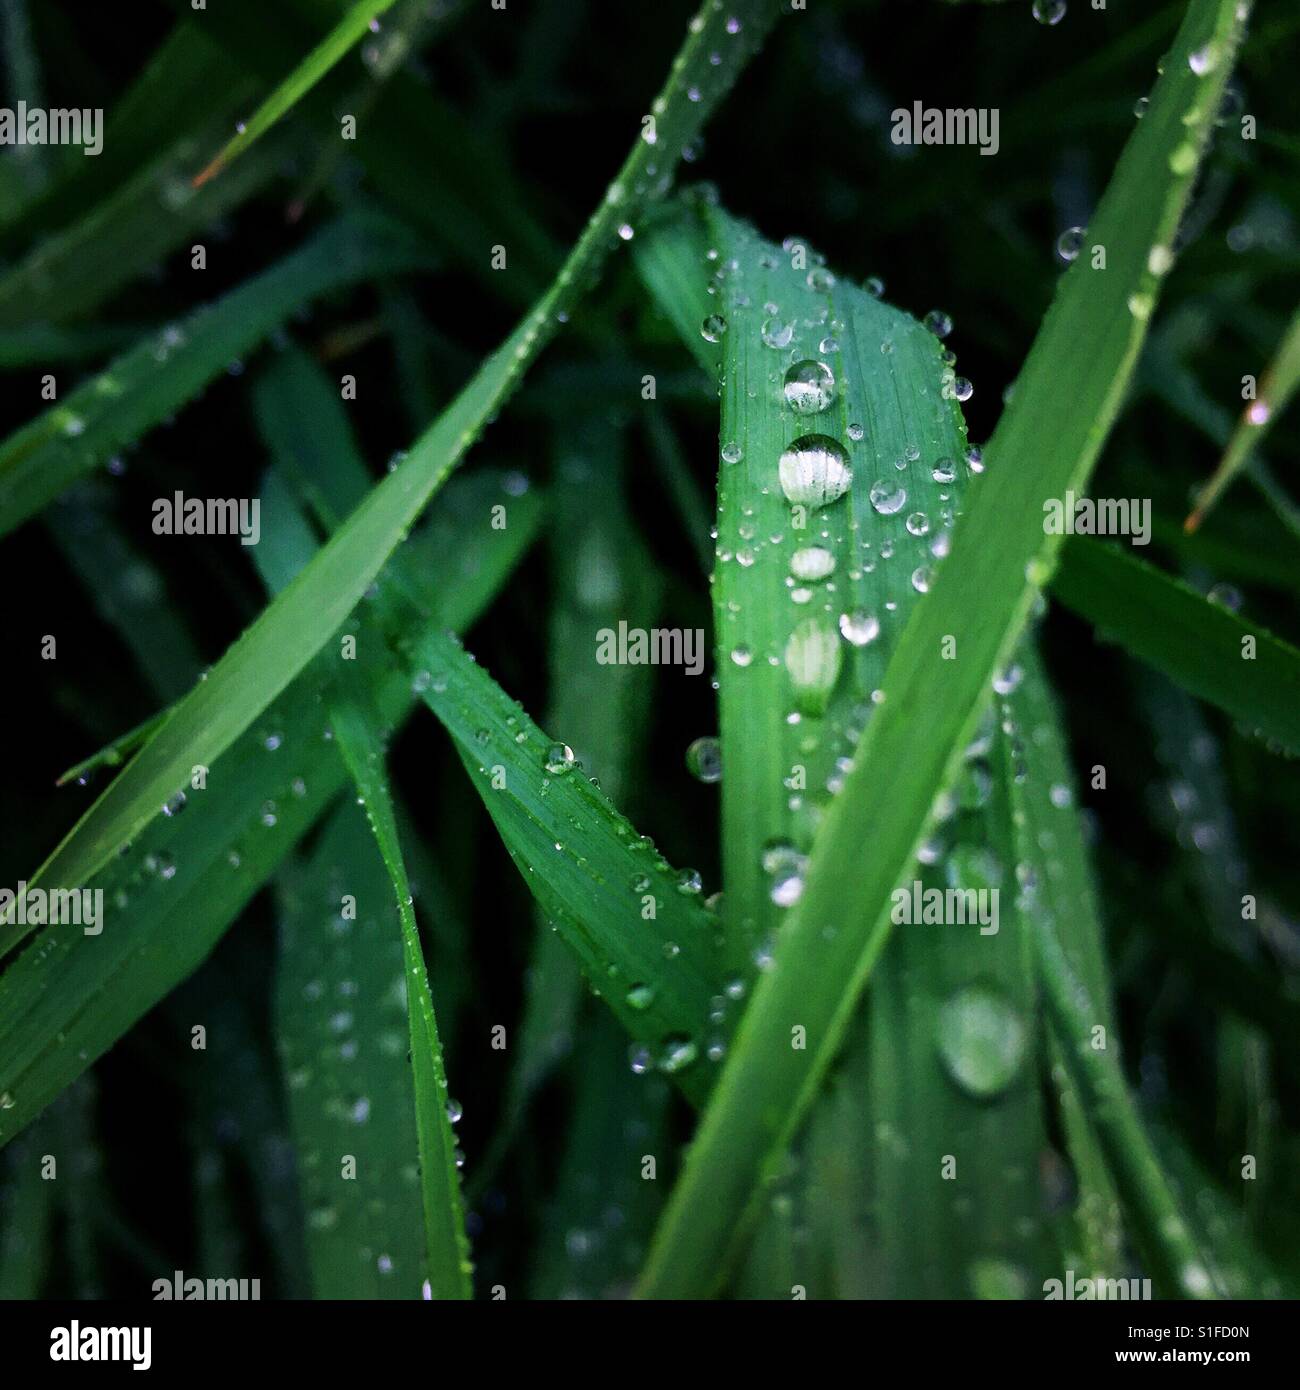 Water droplets on blades of grass Stock Photo